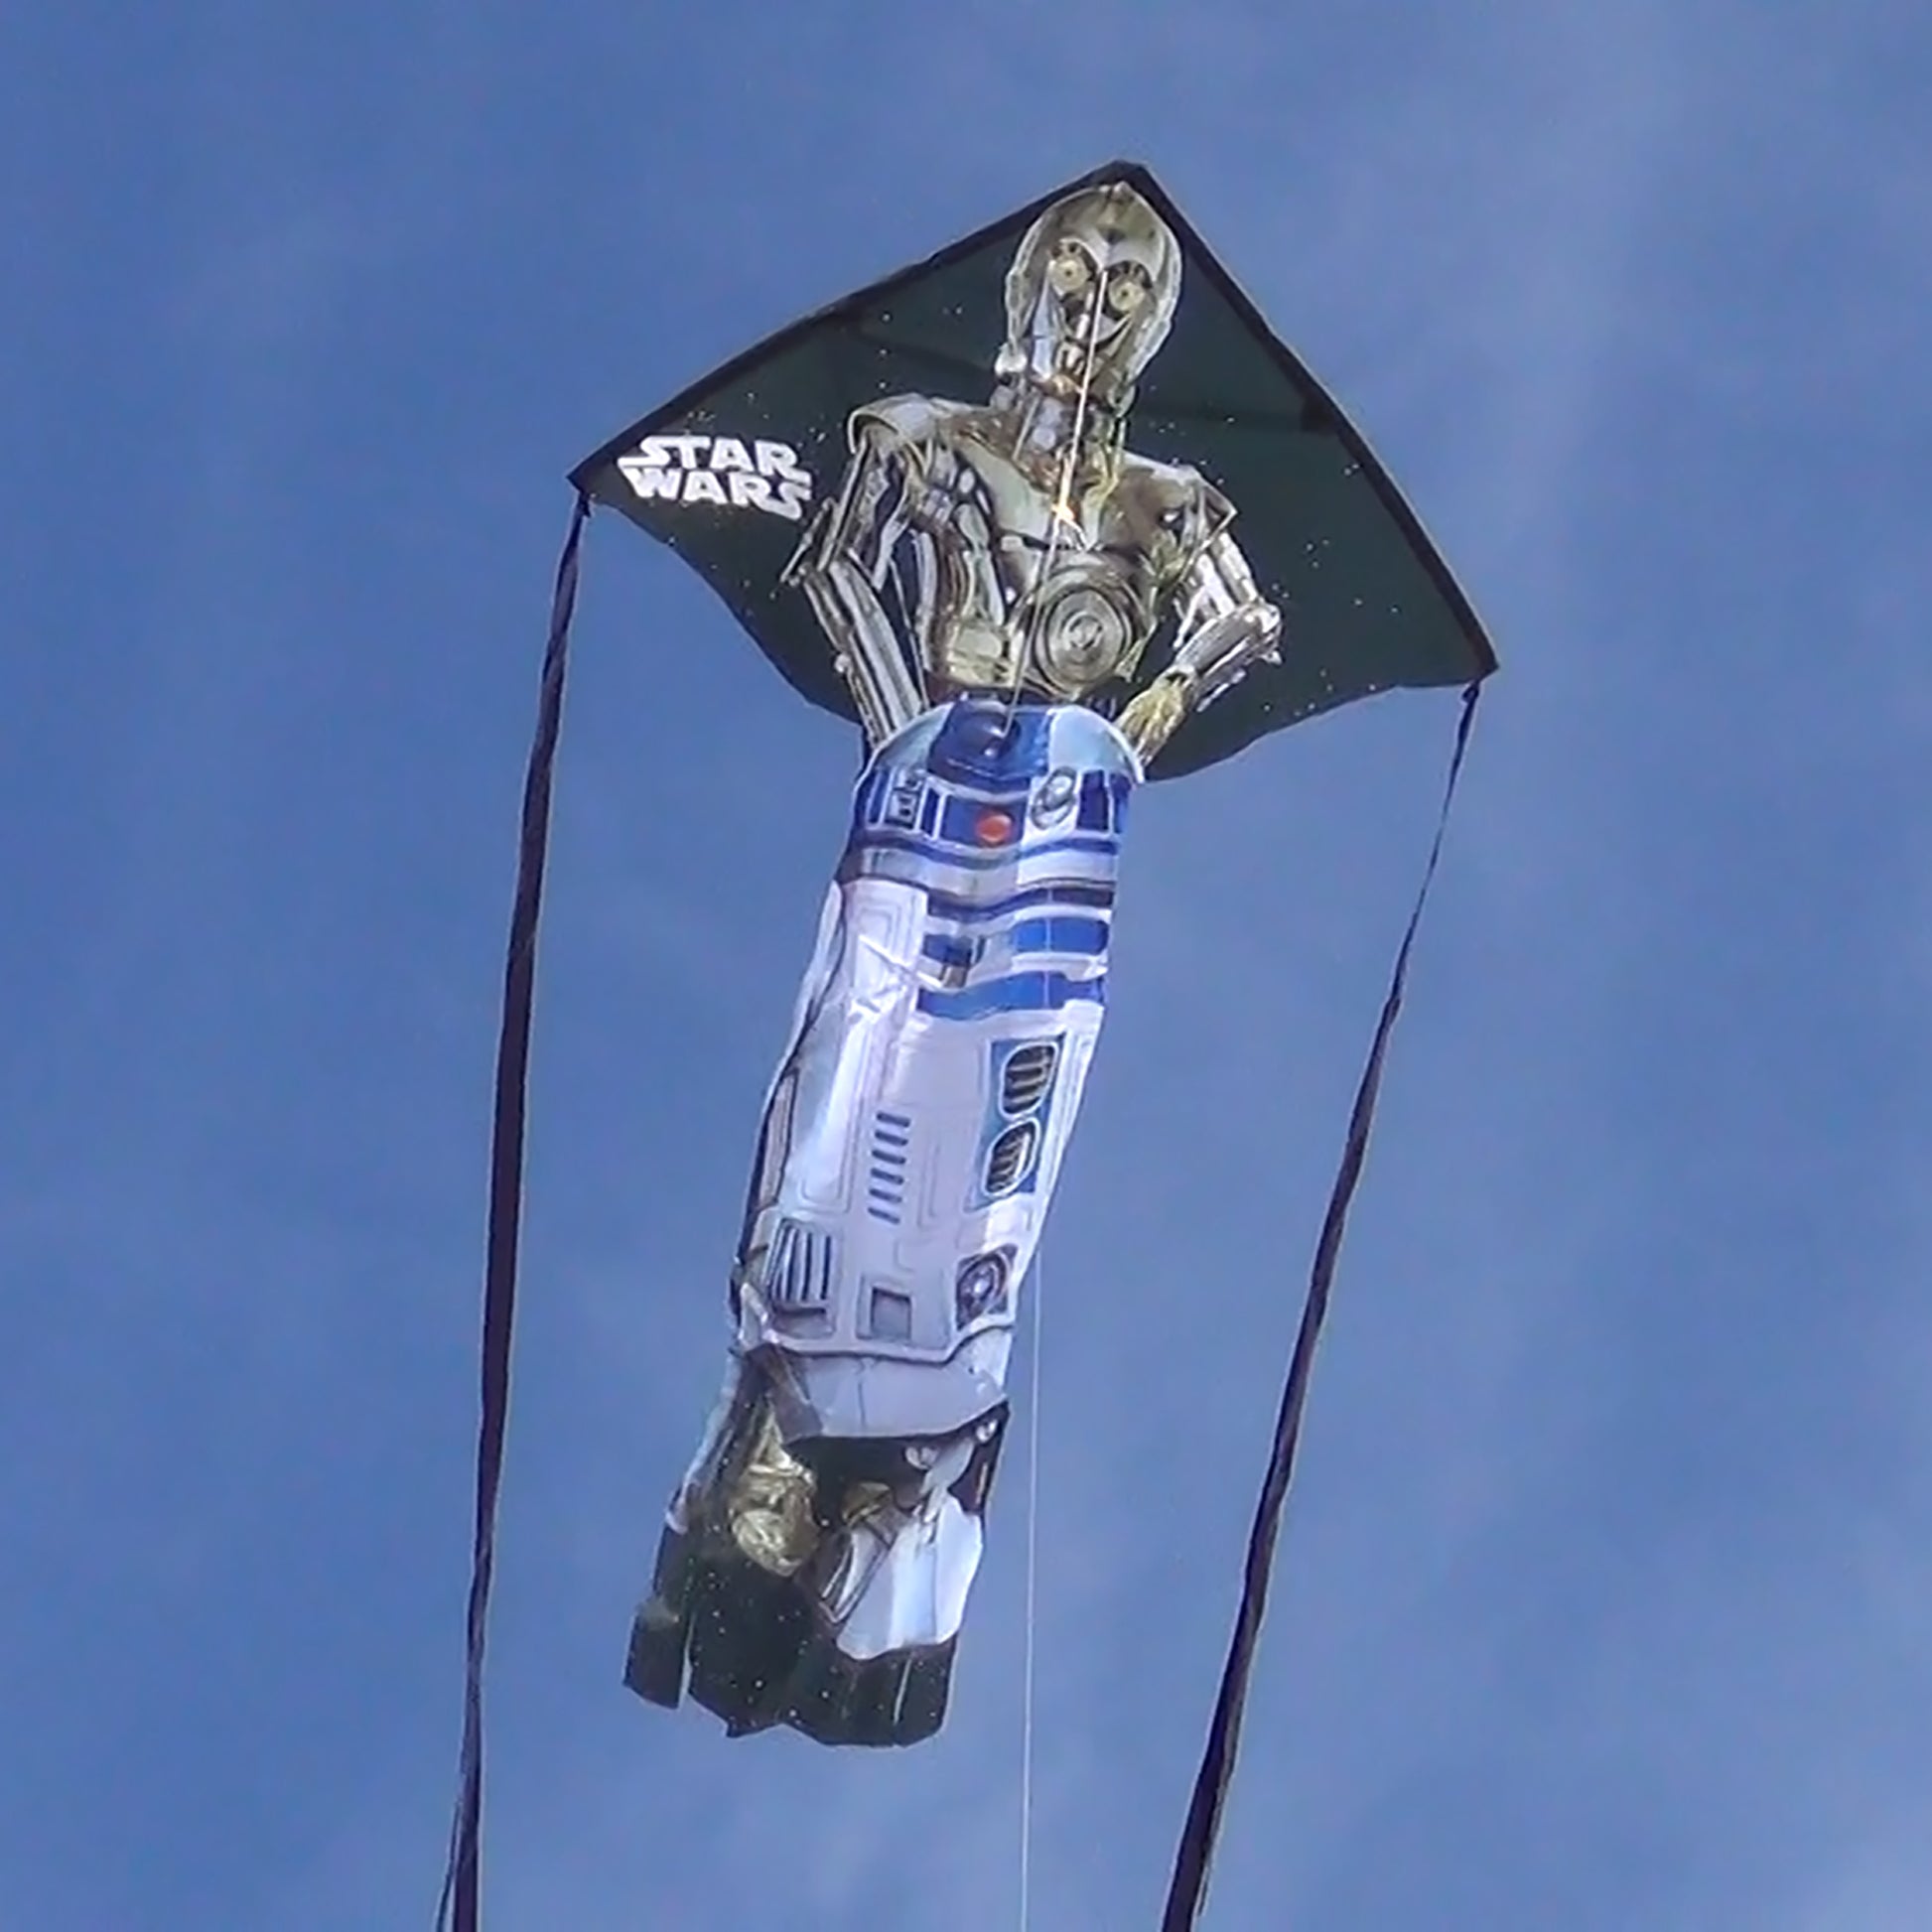 WindNSun Breezy Fliers 57 Star Wars Droids Nylon C3PO & R2D2 Kite photo of product in use